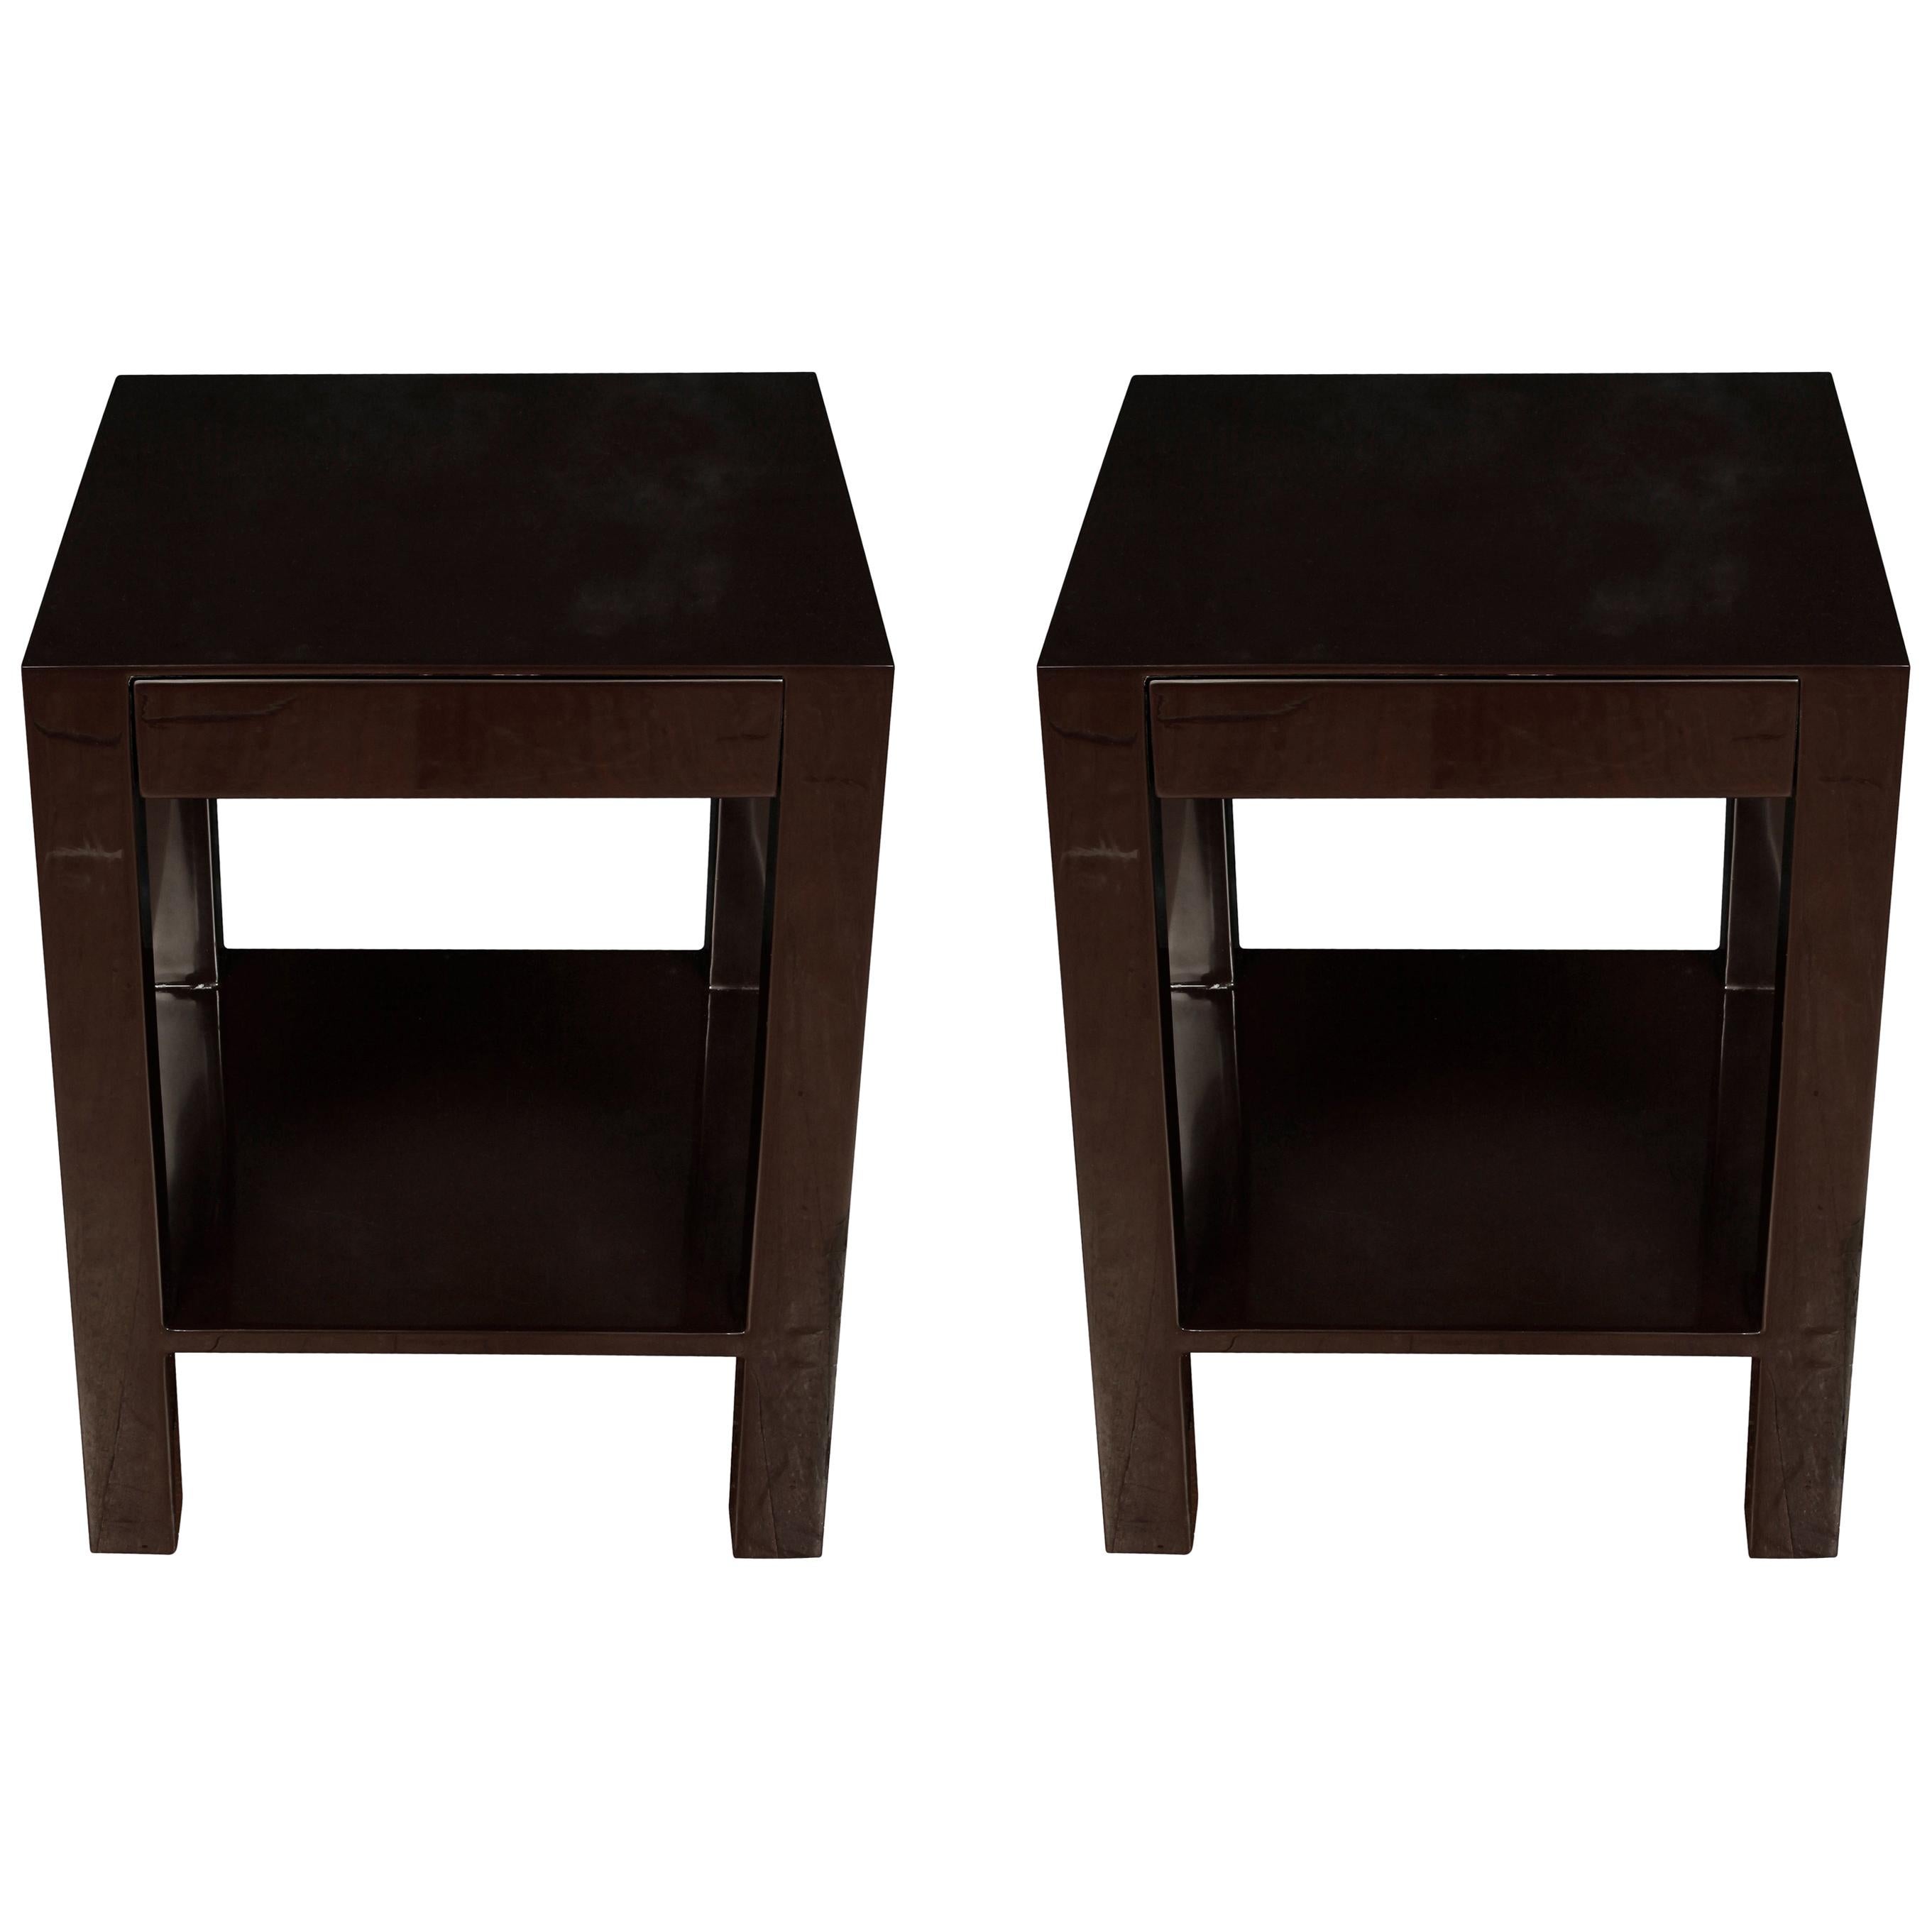 Pair of High Gloss Brown Lacquer Side Tables